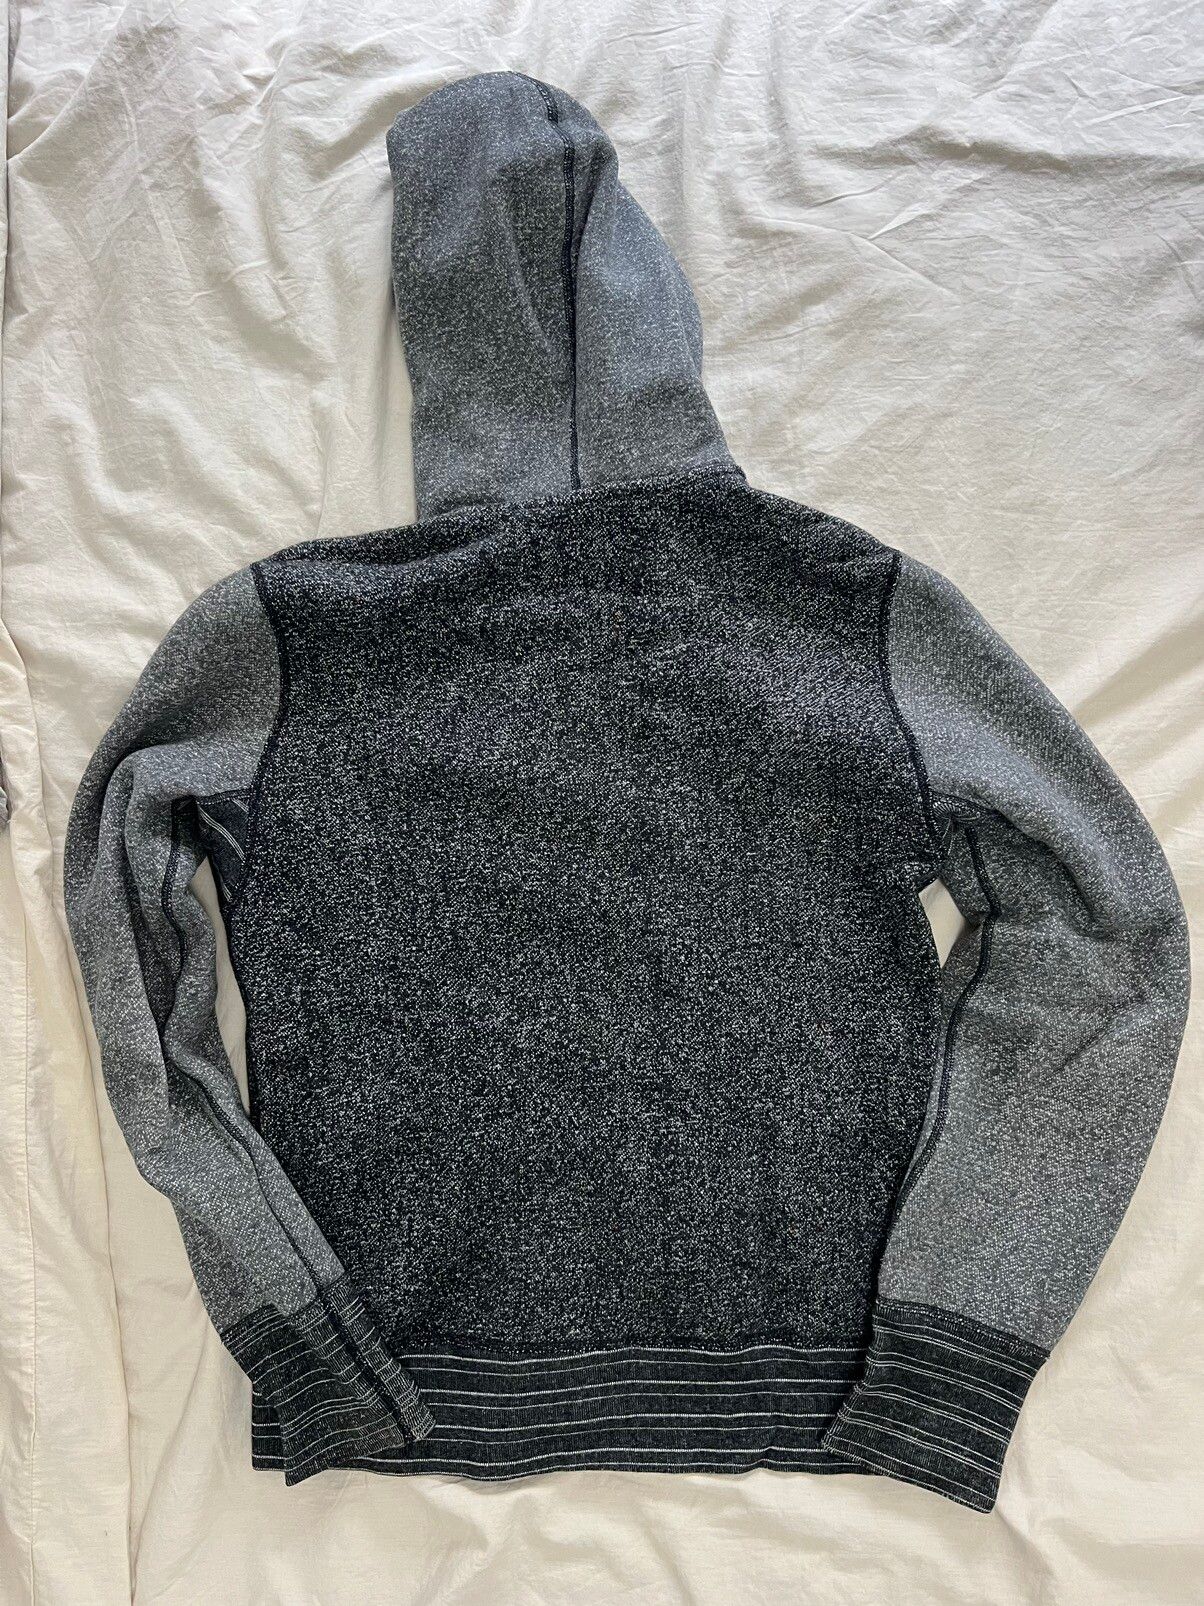 Wings + Horns Wings + Horns - Tiger Fleece Size US M / EU 48-50 / 2 - 2 Preview